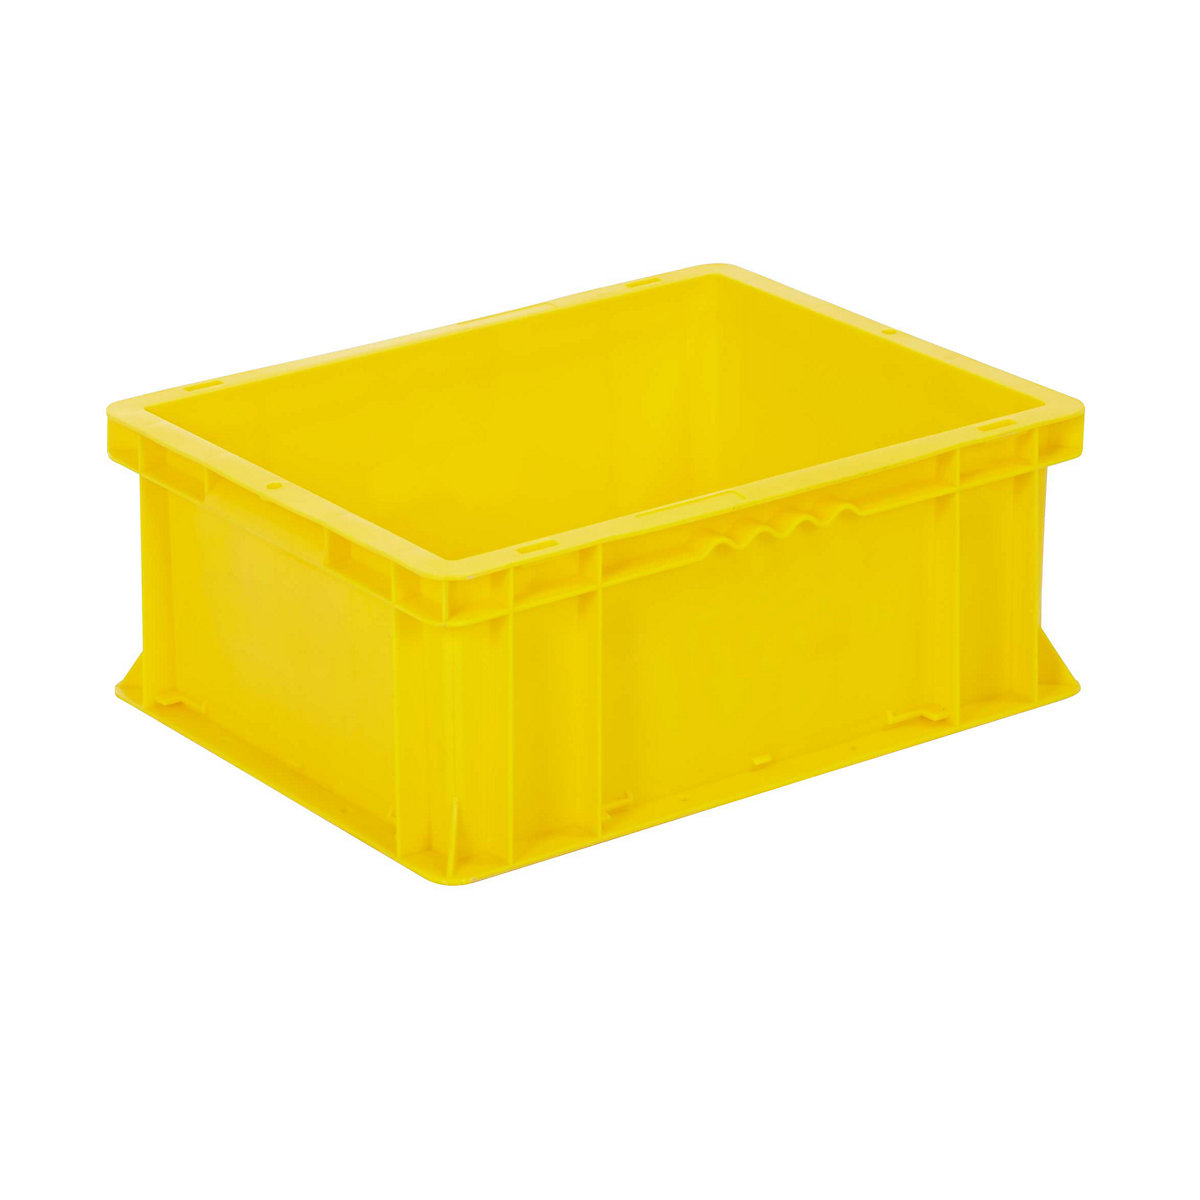 Euro stacking container, capacity 14 litre, yellow-8